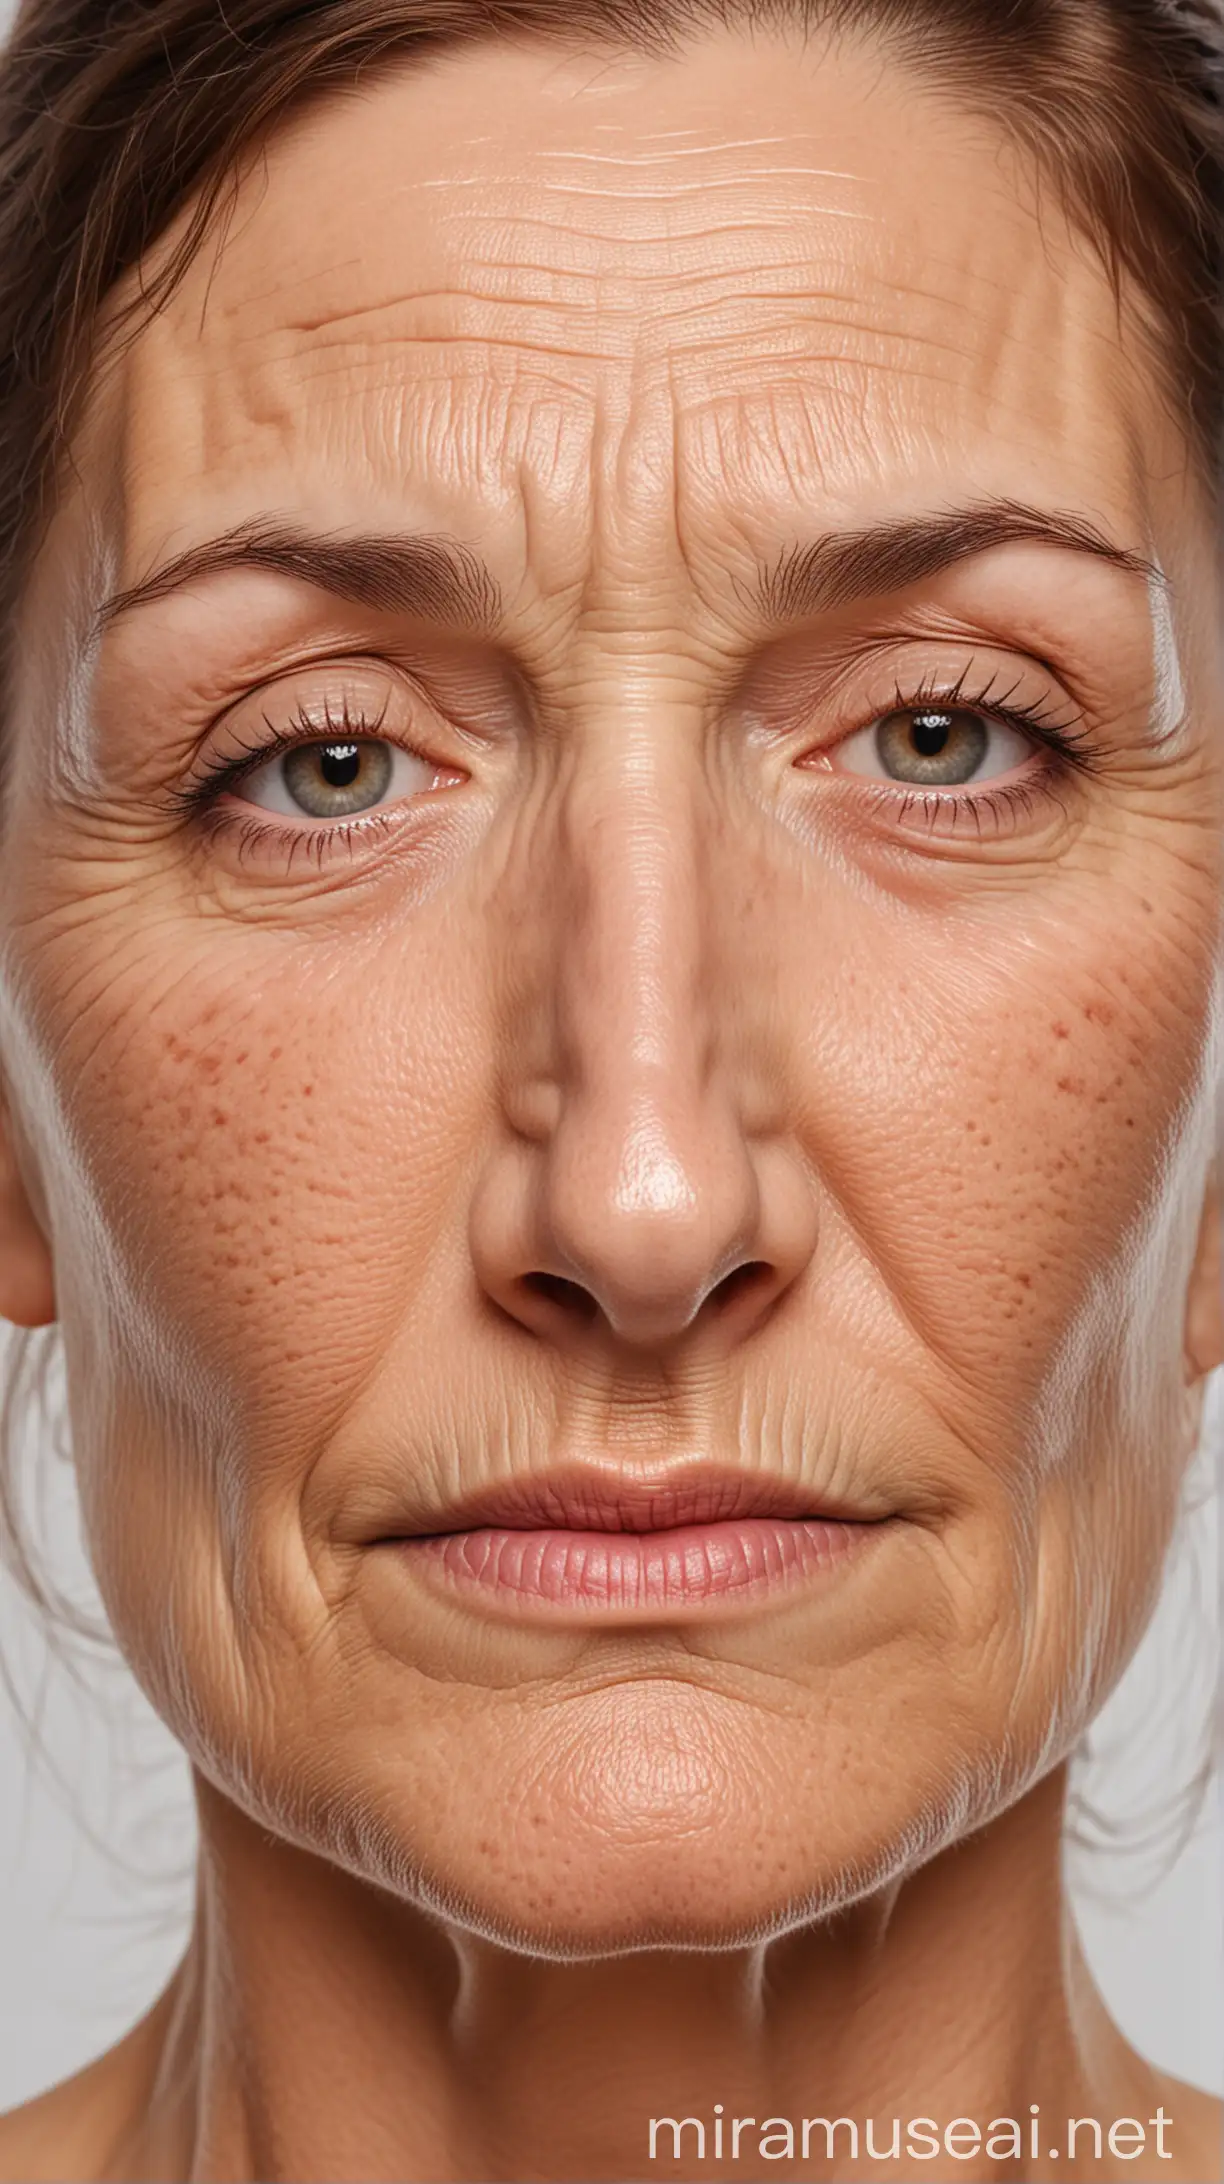 image of a woman with wrinkles in her face. do not stretch out the face make it normal!

